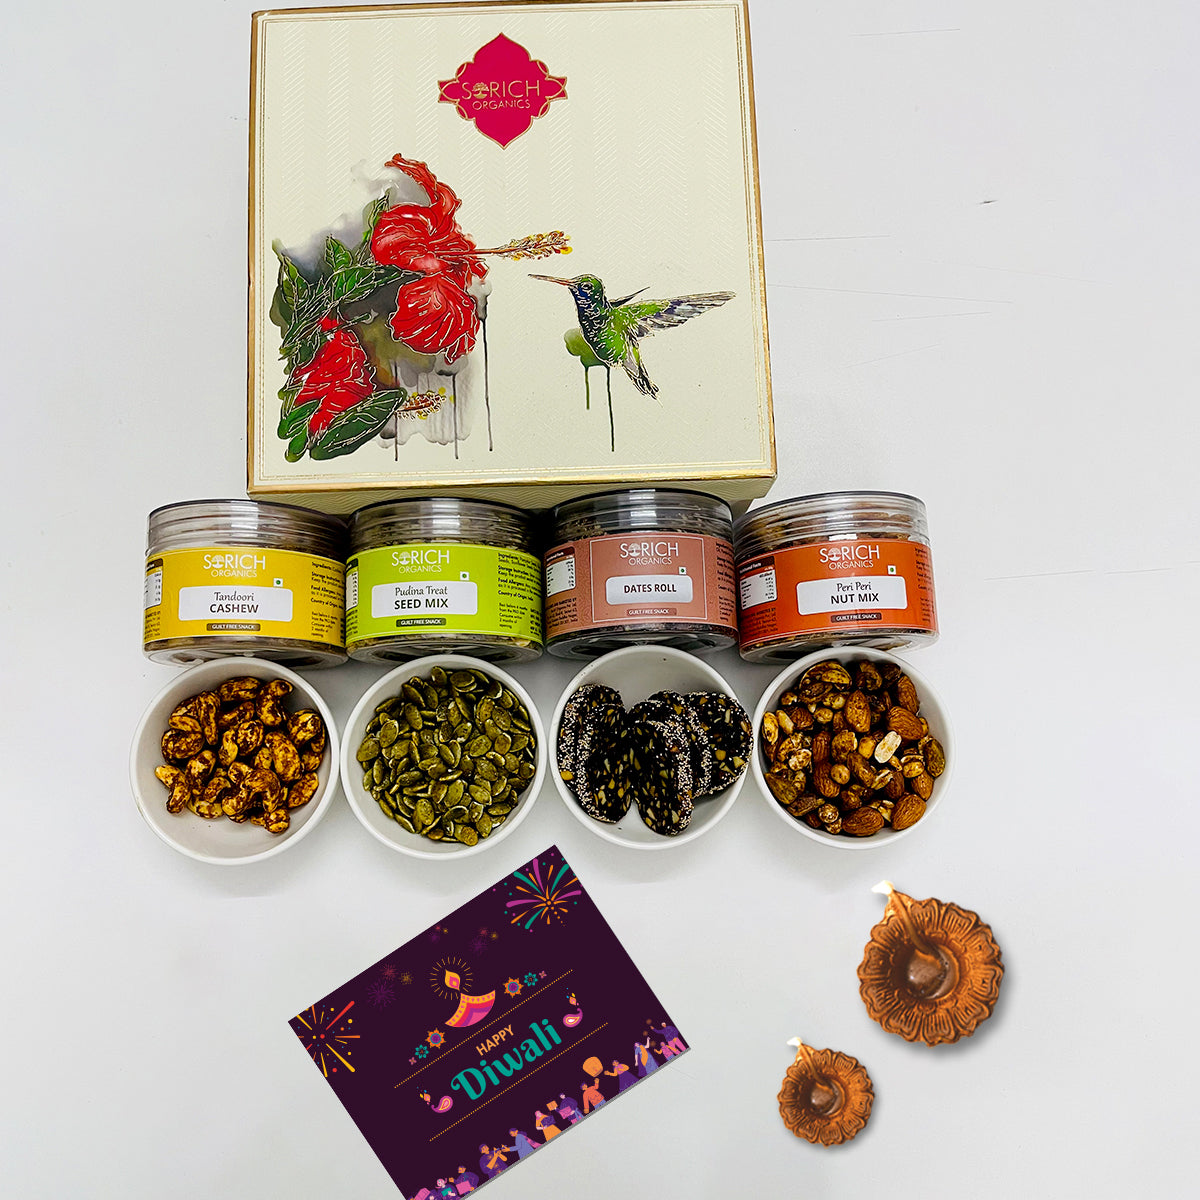 Diwali Special Imperial Gift hamper for Family and Friends | Tandoori Cashew 150g, Pudina Seeds Mix 150g,  Dates Roll 150g, Peri Peri Nut Mix 150g